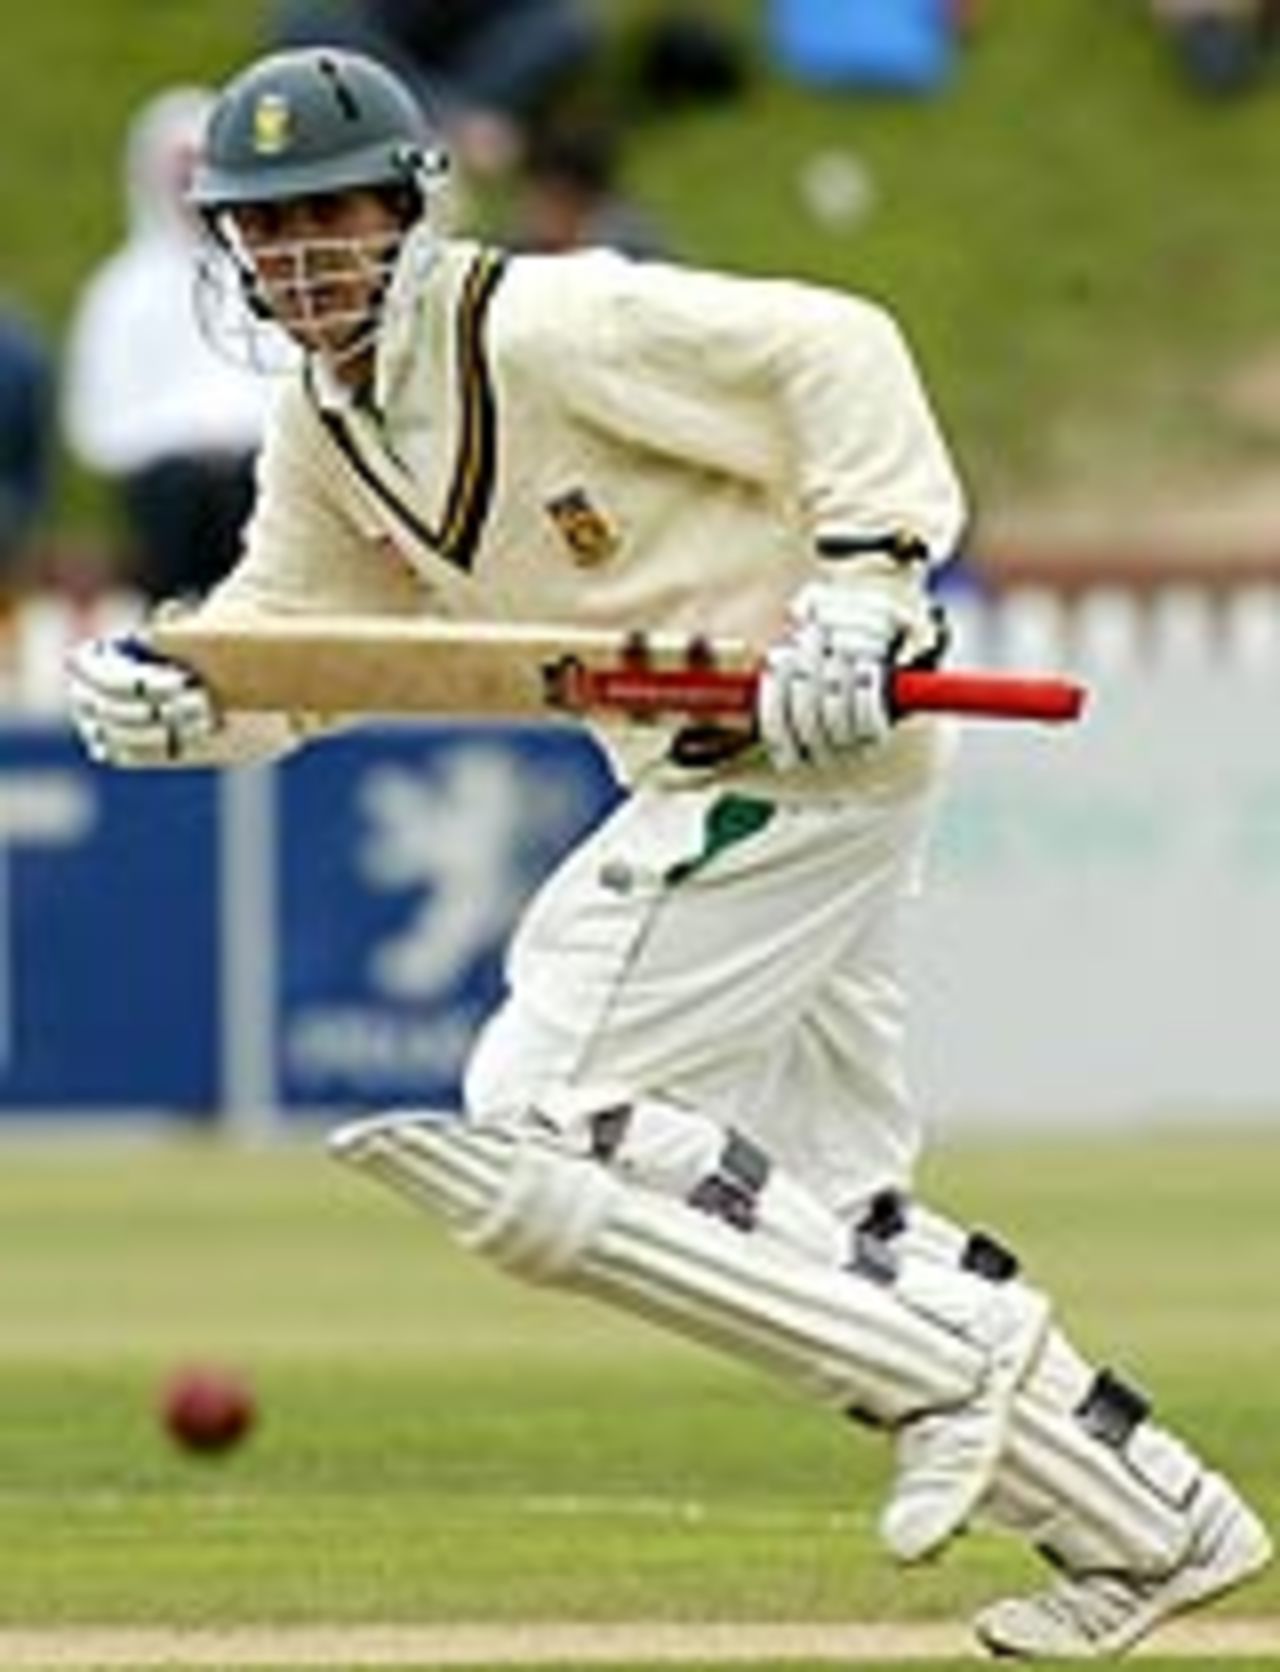 Jacques Rudolph takes off for a run, New Zealand v South Africa, 3rd Test, Wellington, 3rd day, March 28, 2004